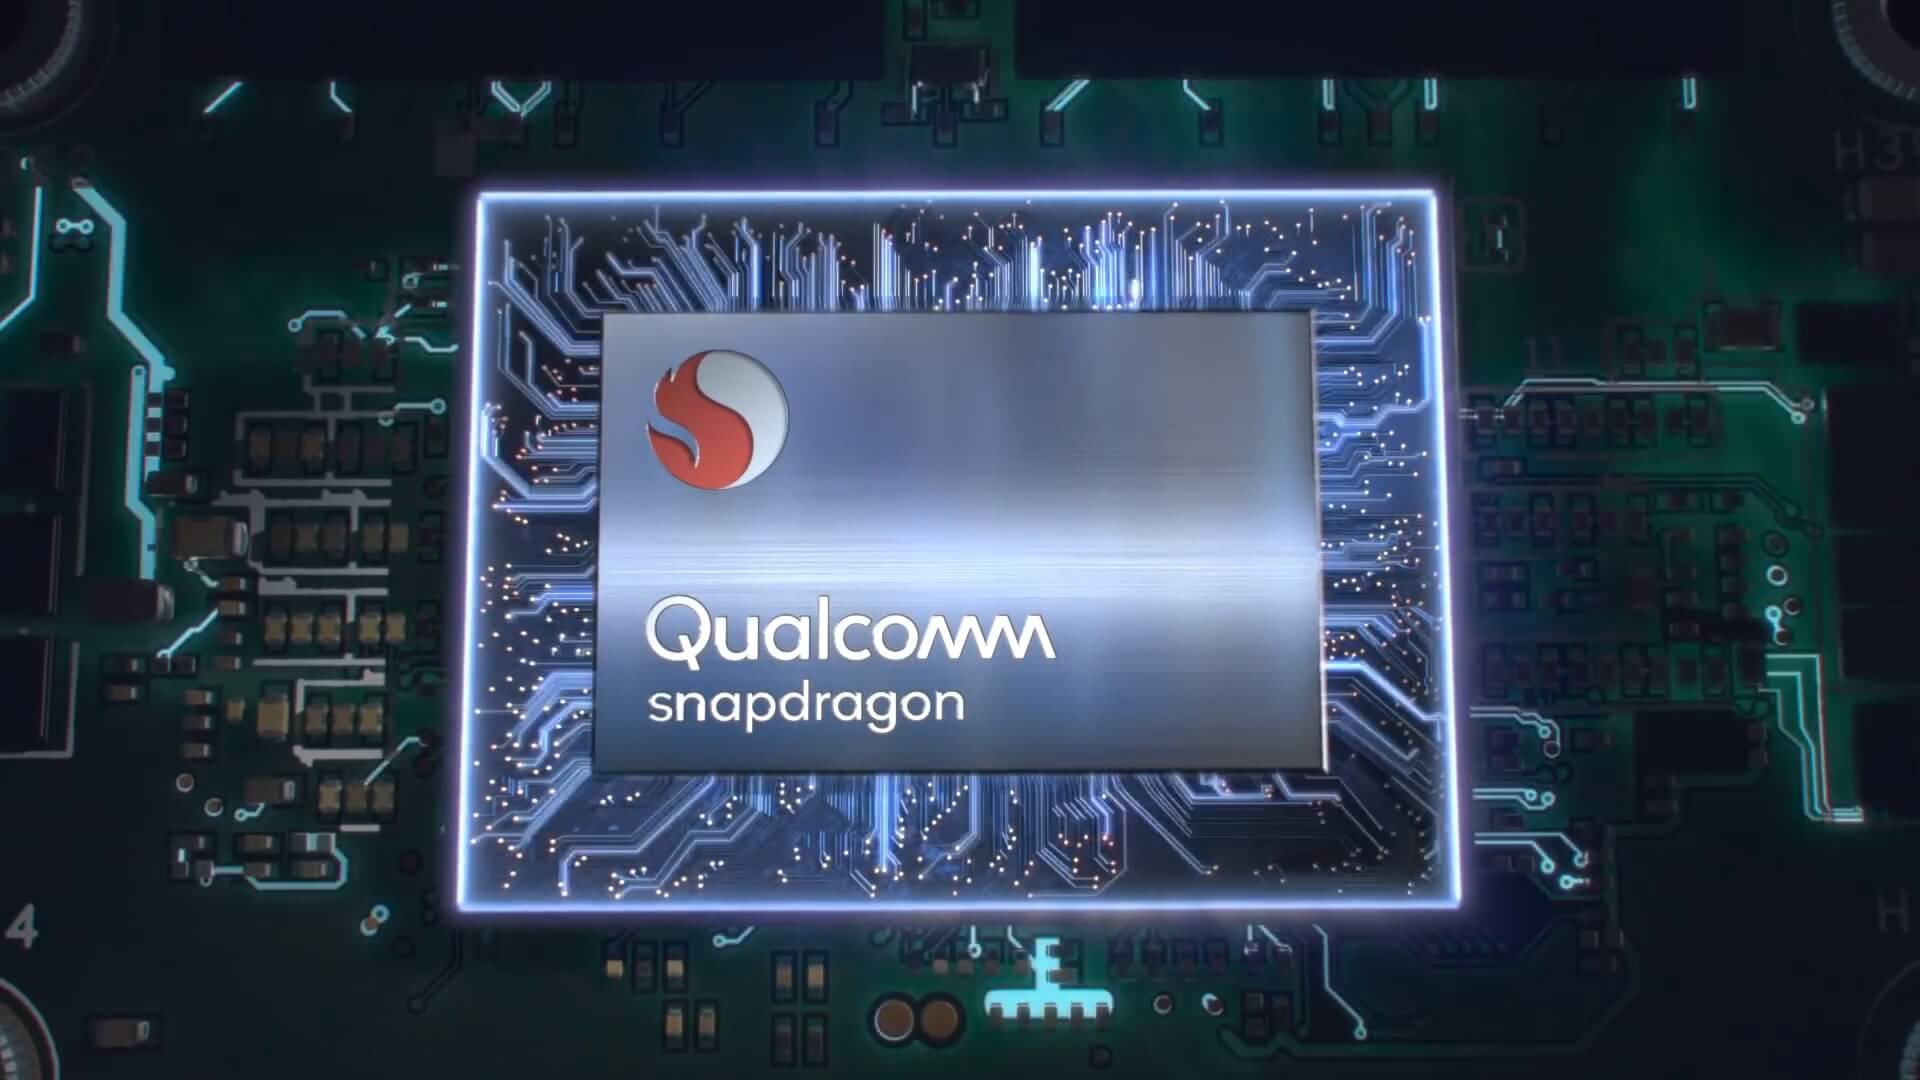 Meet the Snapdragon 8cx: Qualcomm's most powerful SoC, coming to PCs